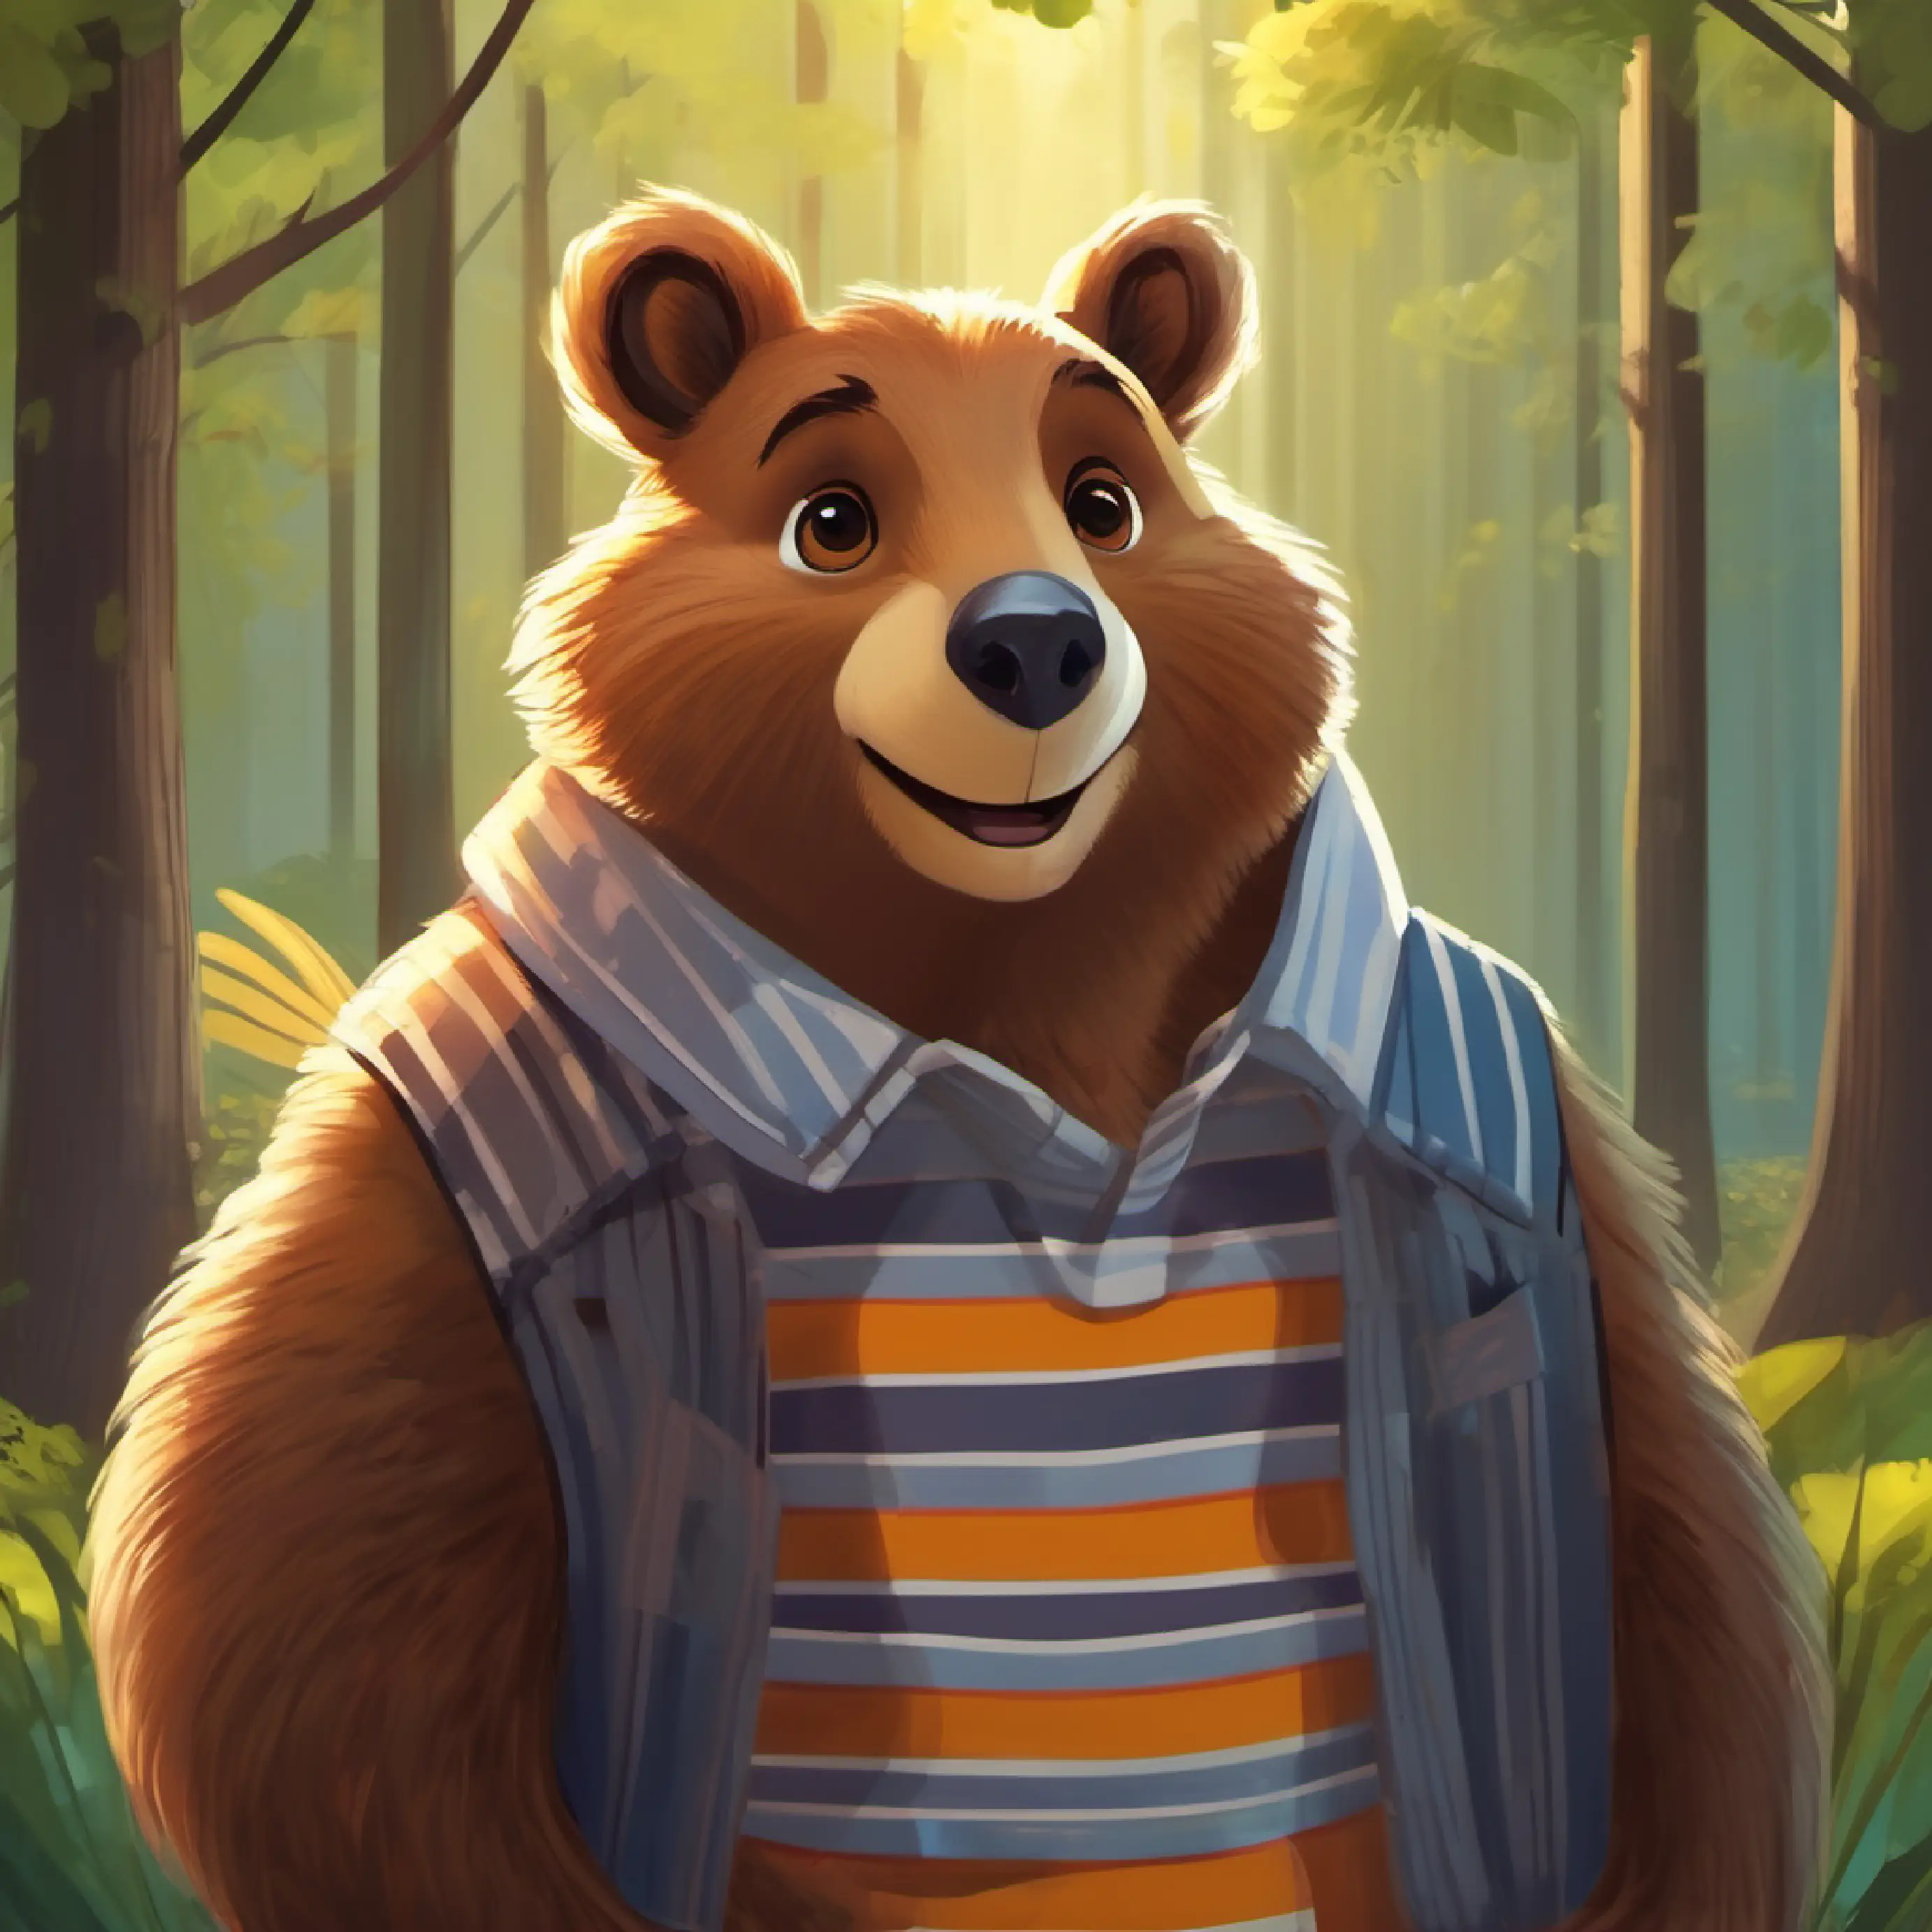 Brown bear with a bright smile and a striped shirt, brown eyes and Grey squirrel with a shy demeanor, dark eyes say goodbye and look forward to another day.